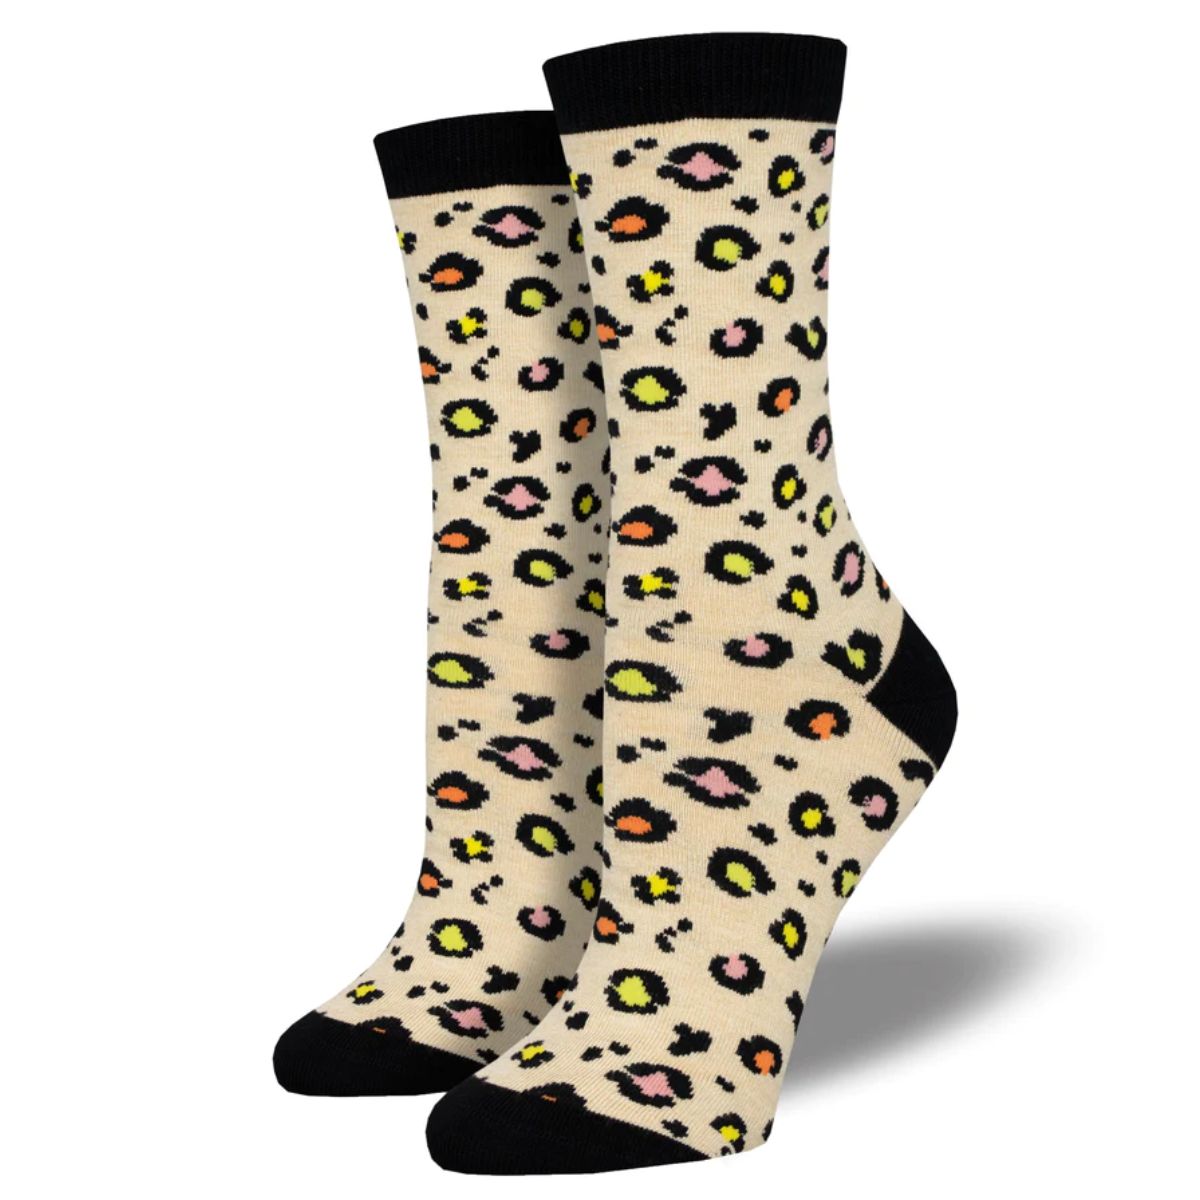 Leopard print socks a pair of white crew socks with colourful leopard print